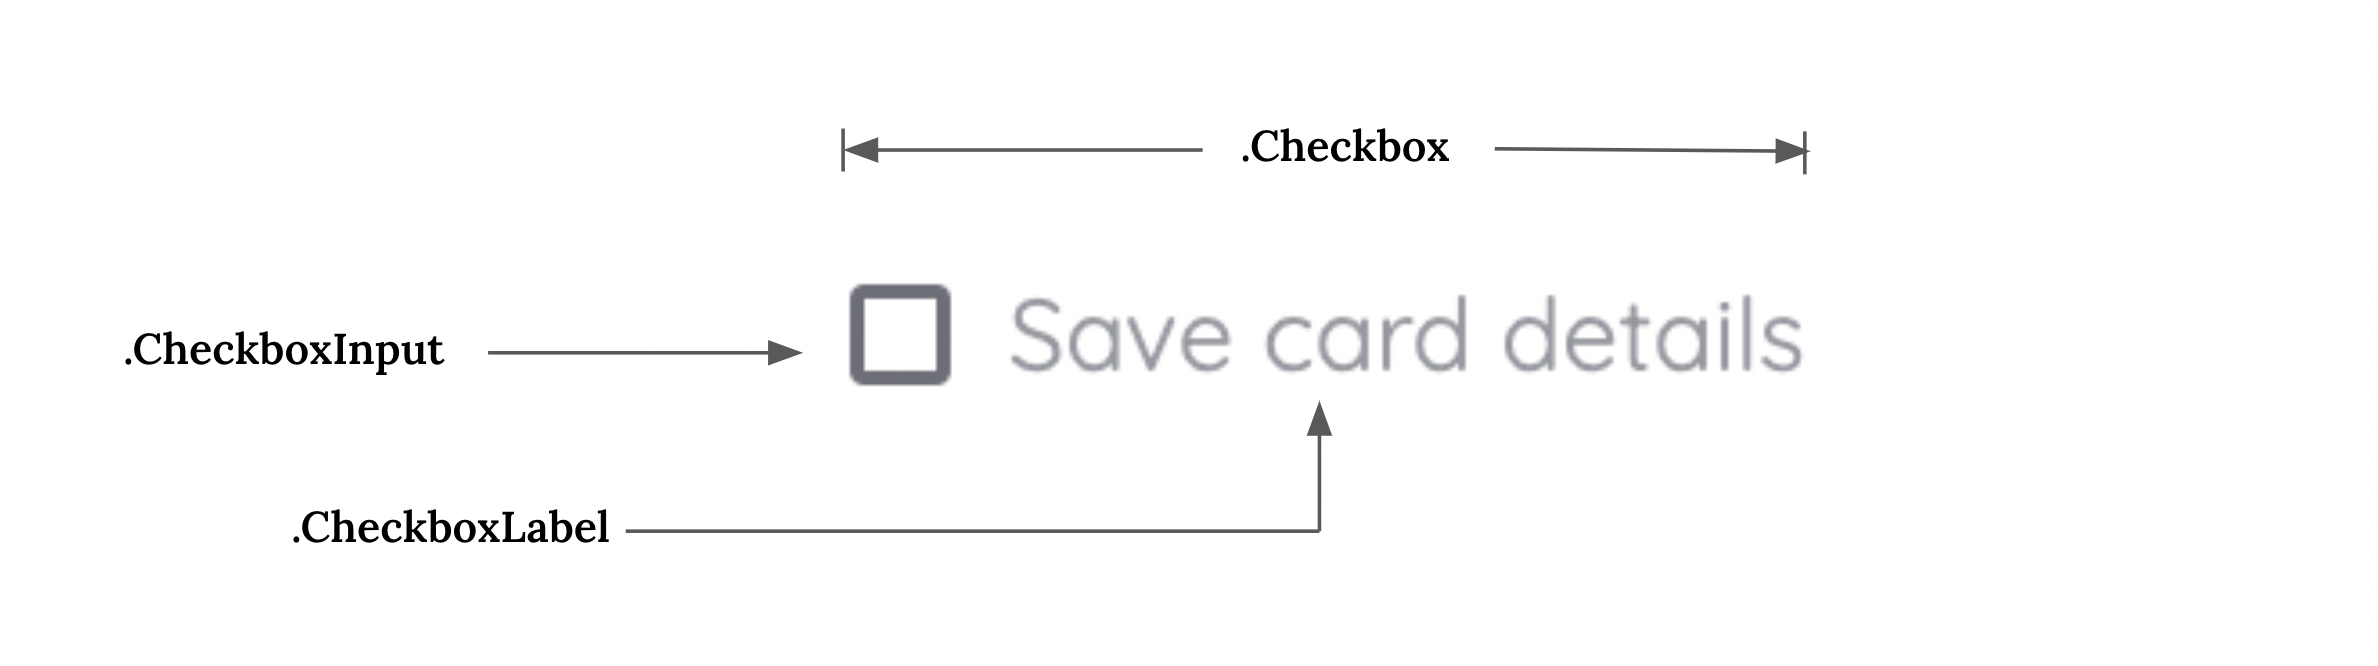 Rules Customization For Checkbox